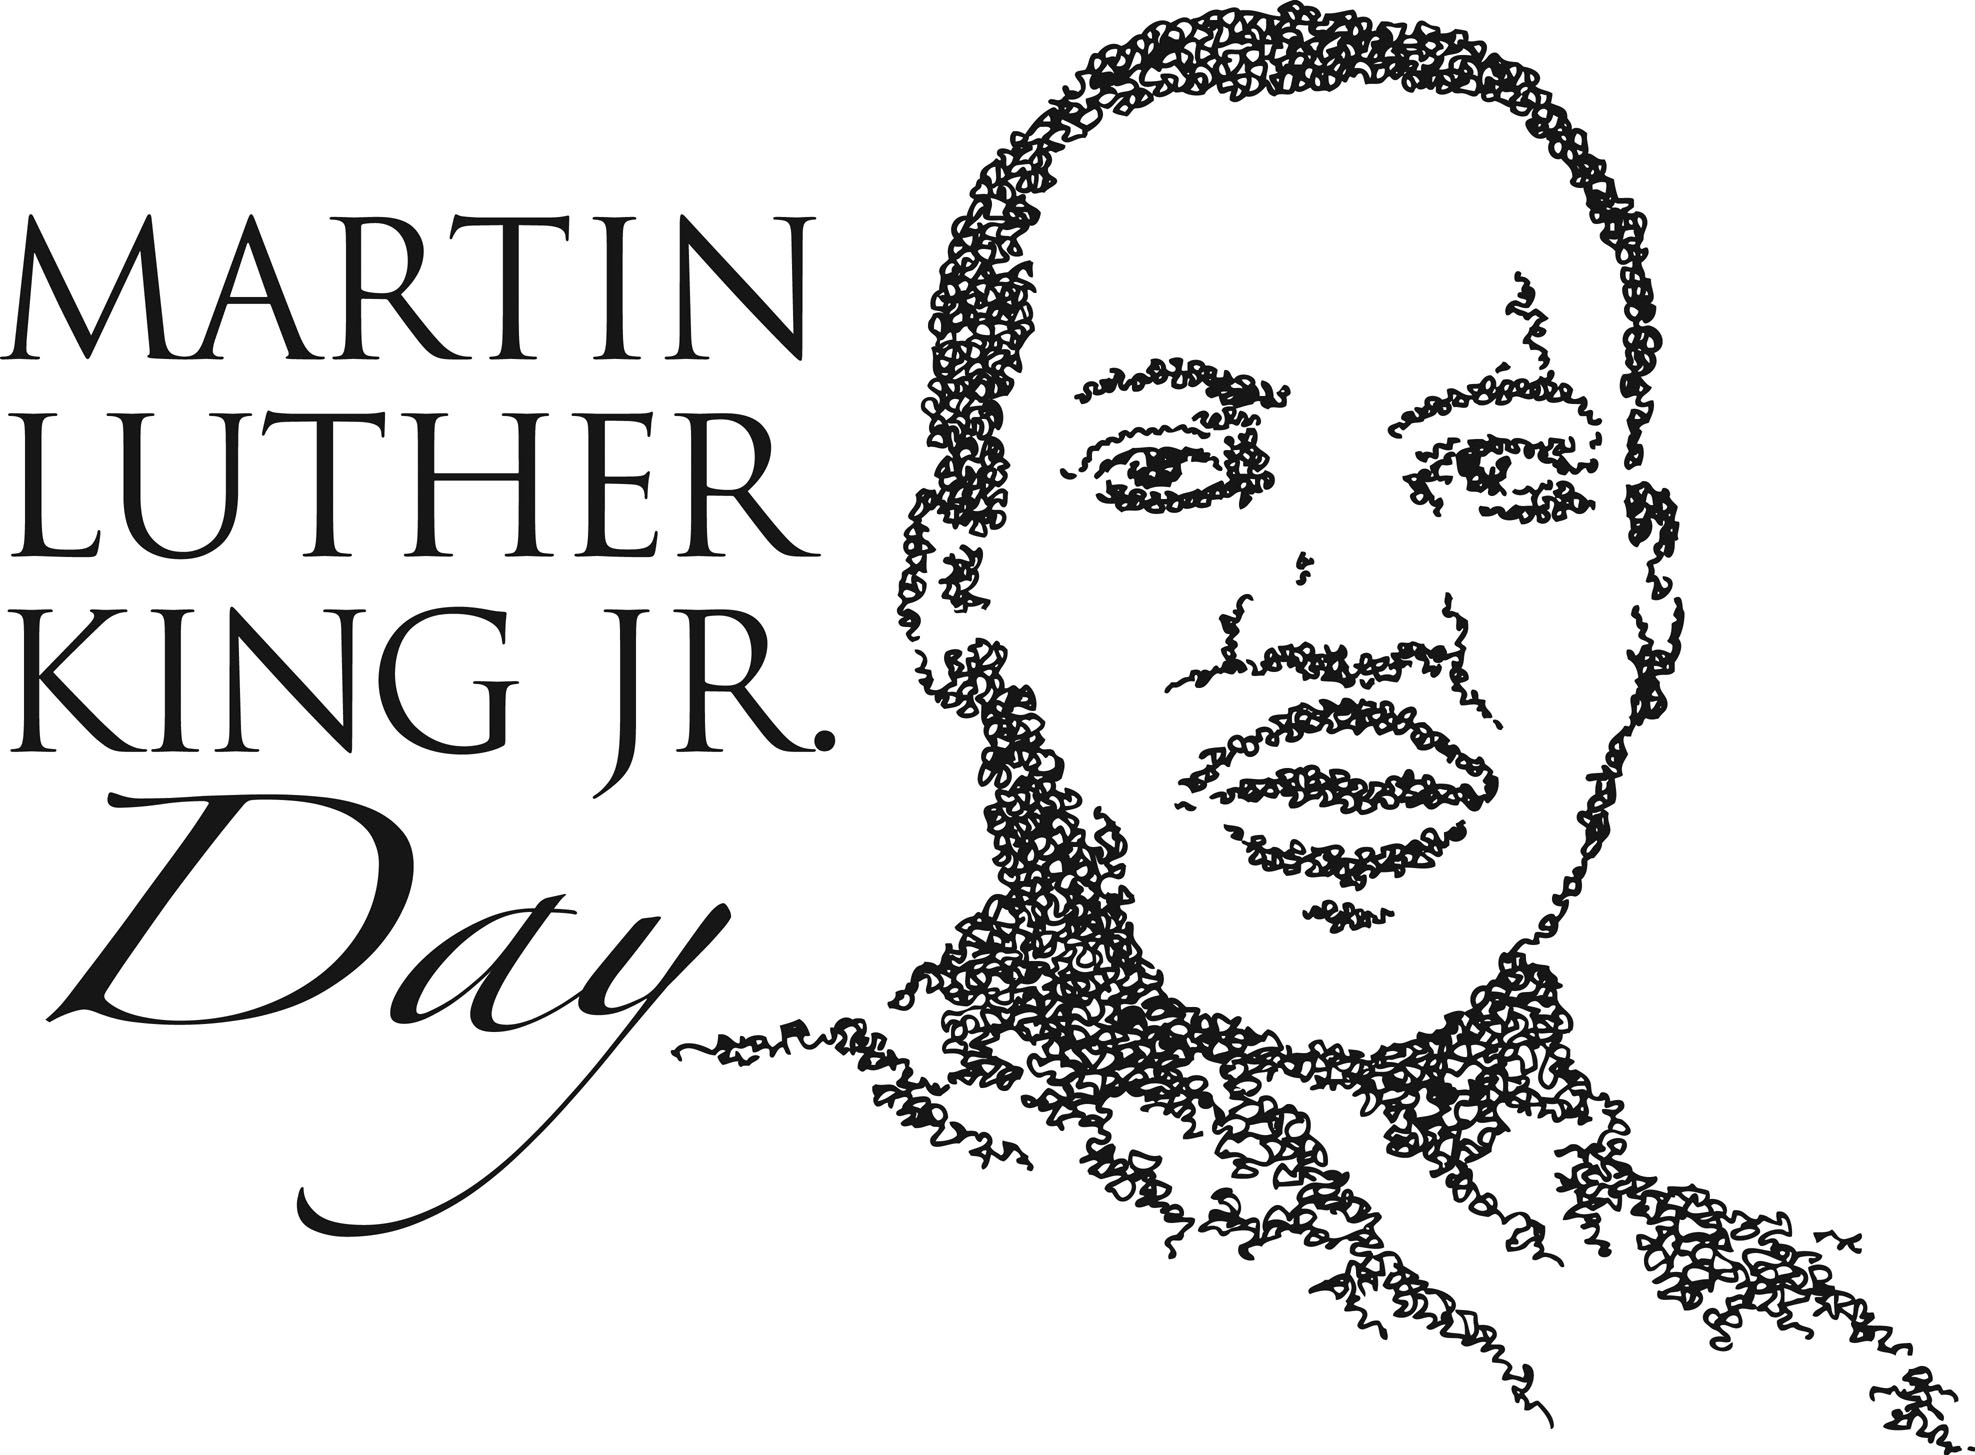 Martin luther king day clipart images - ClipartFest